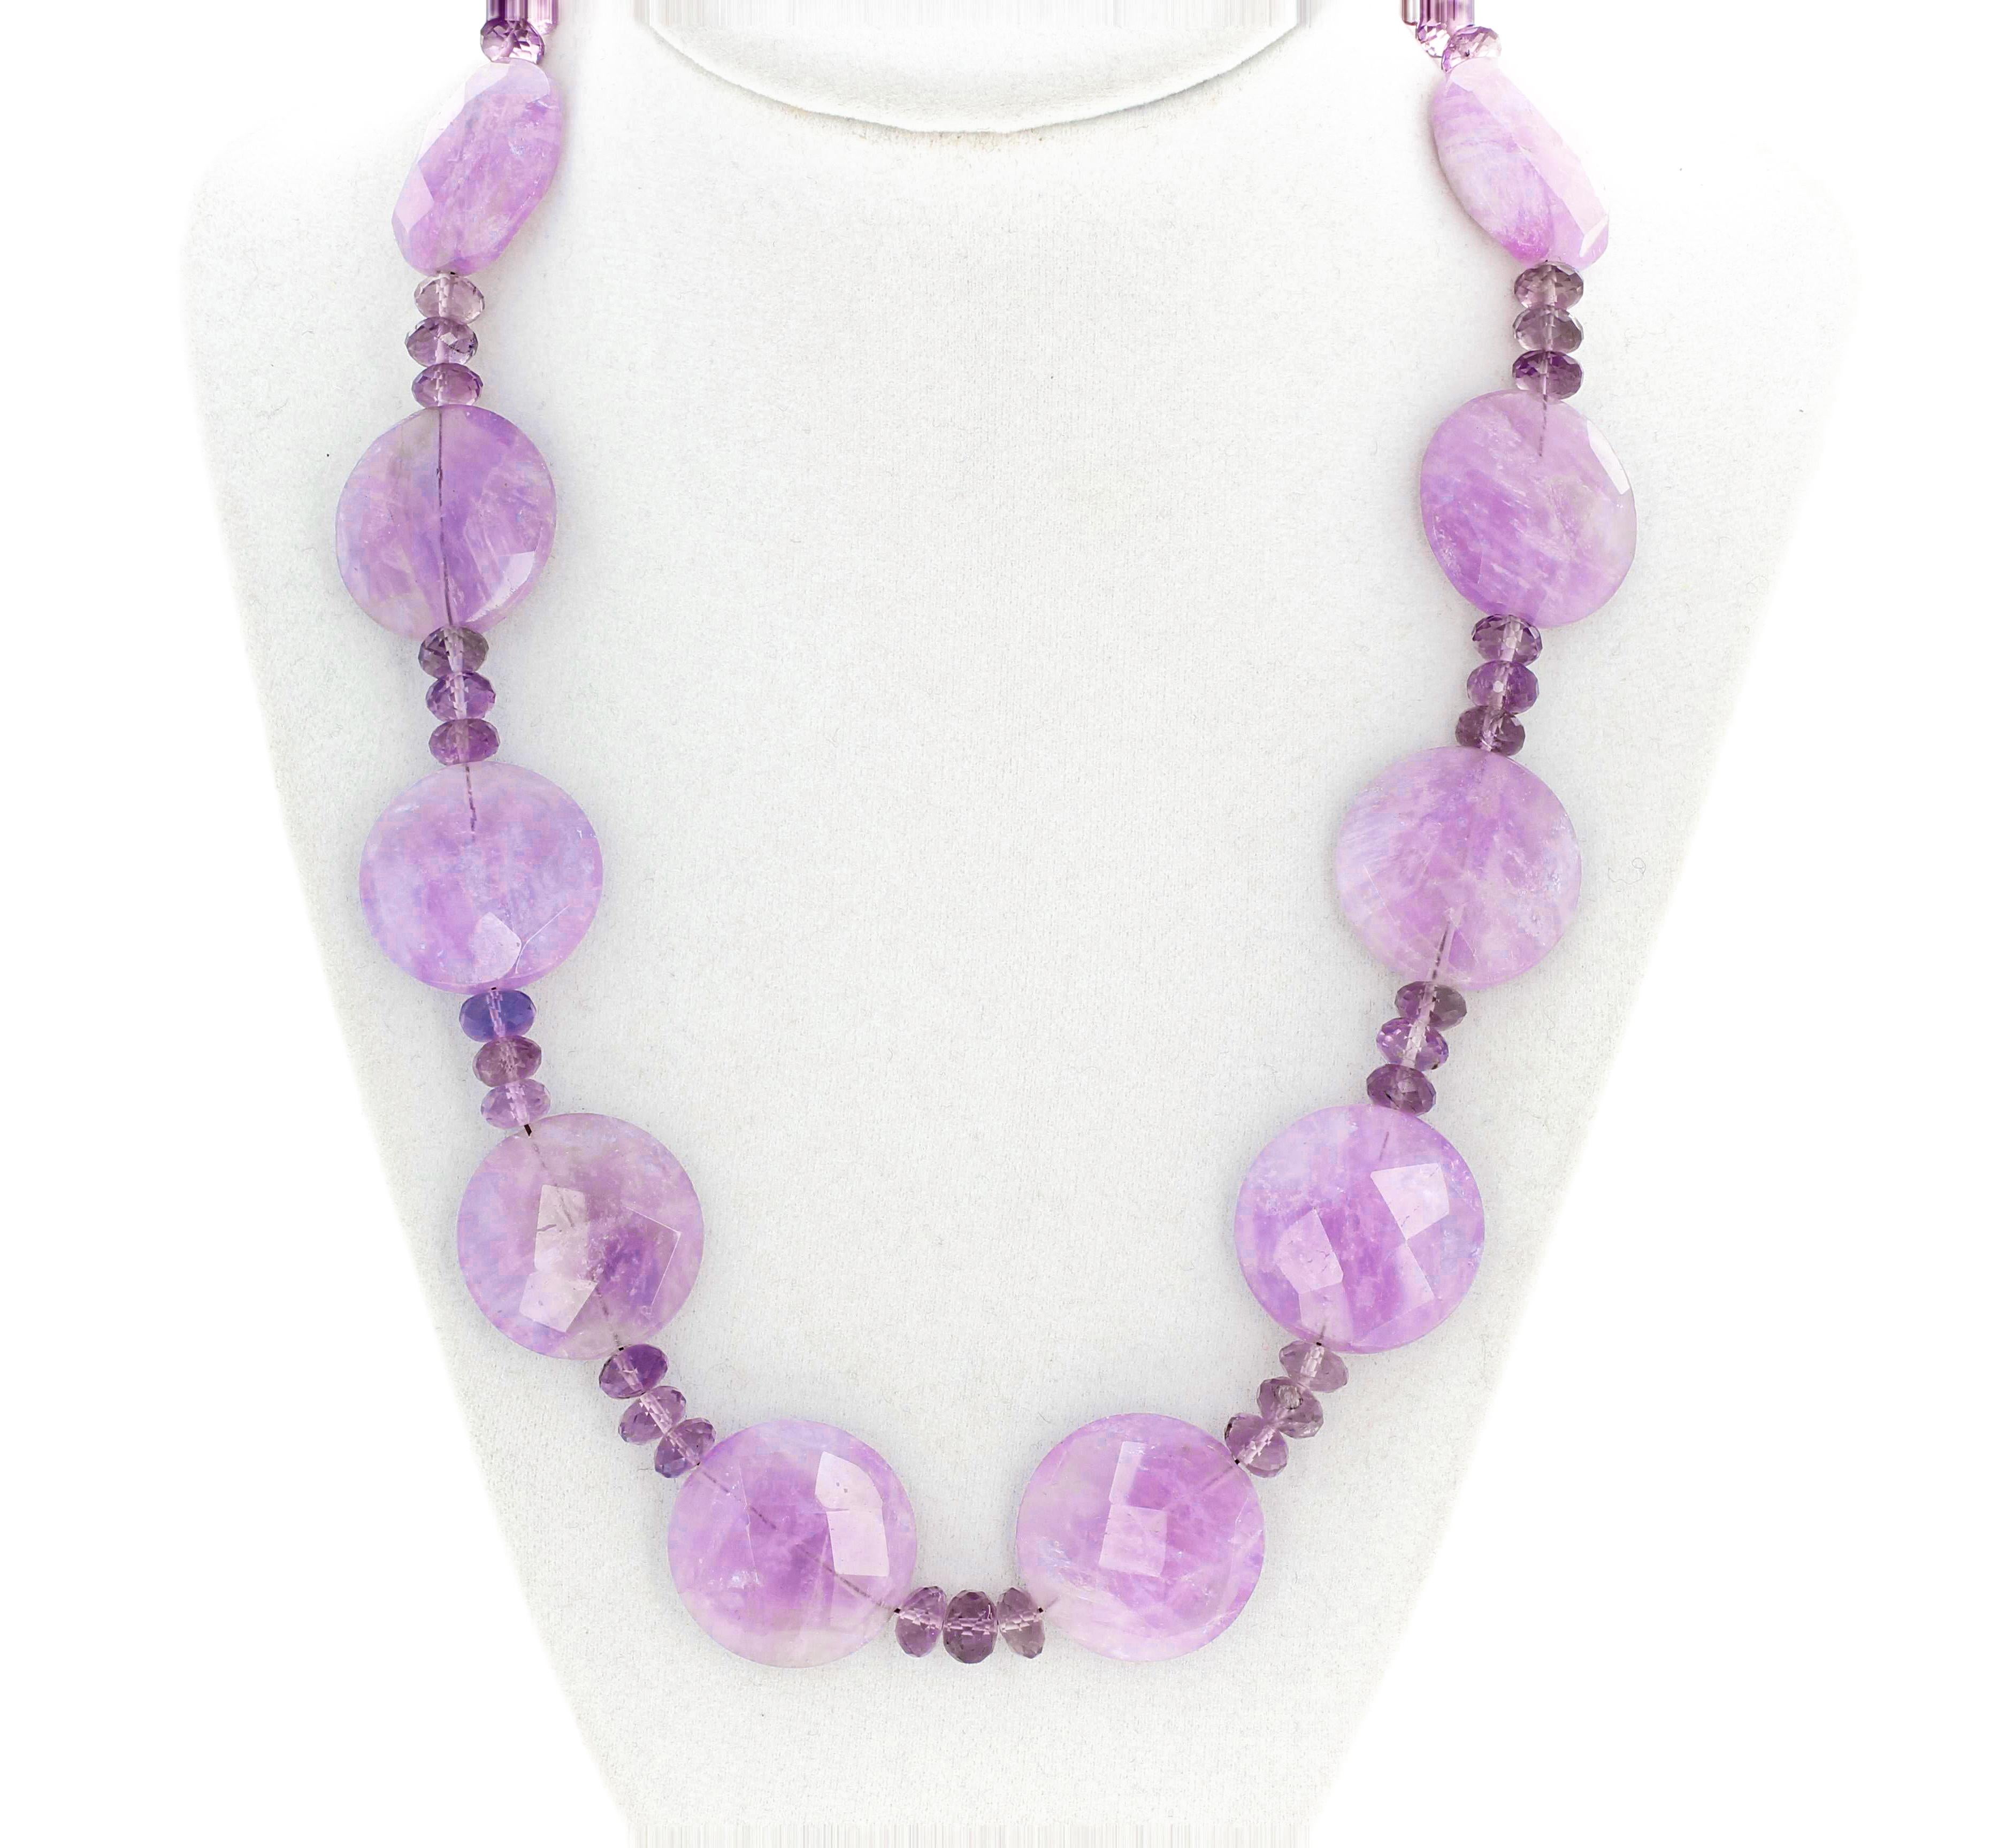 Softly glowing very elegant checkerboard gem cut highly polished coin cut (24 mm across) Amethyst rock enhanced with gem cut sparkling Rose of France set in a handmade unique 20 inch long necklace with silver hook clasp.  